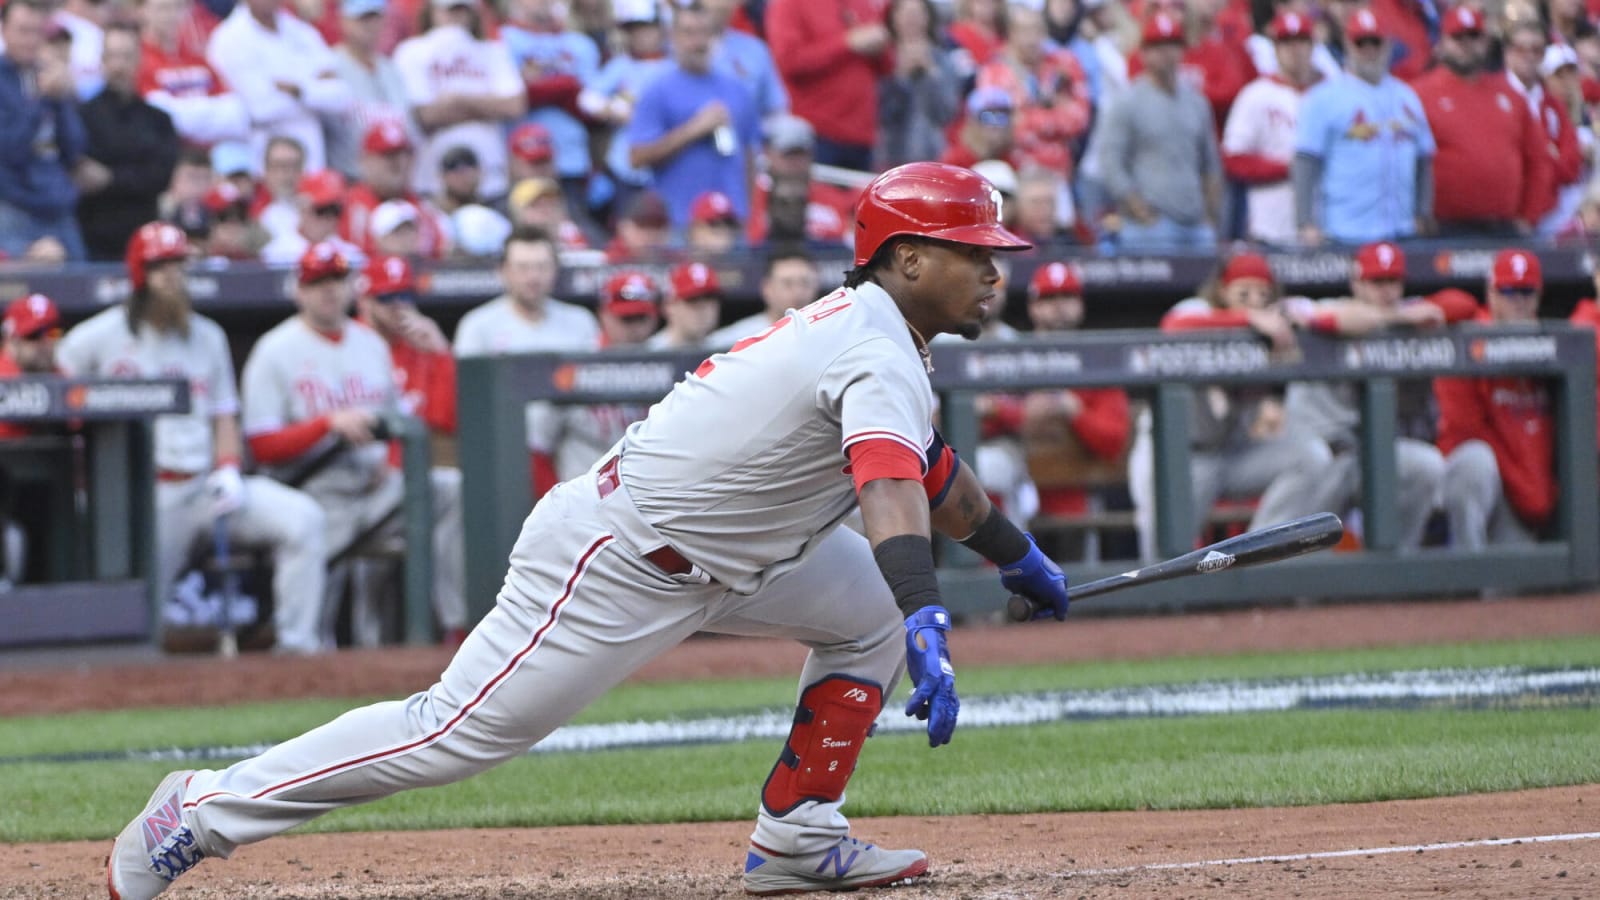 Phillies' Jean Segura played over 1300 games waiting for playoff moment